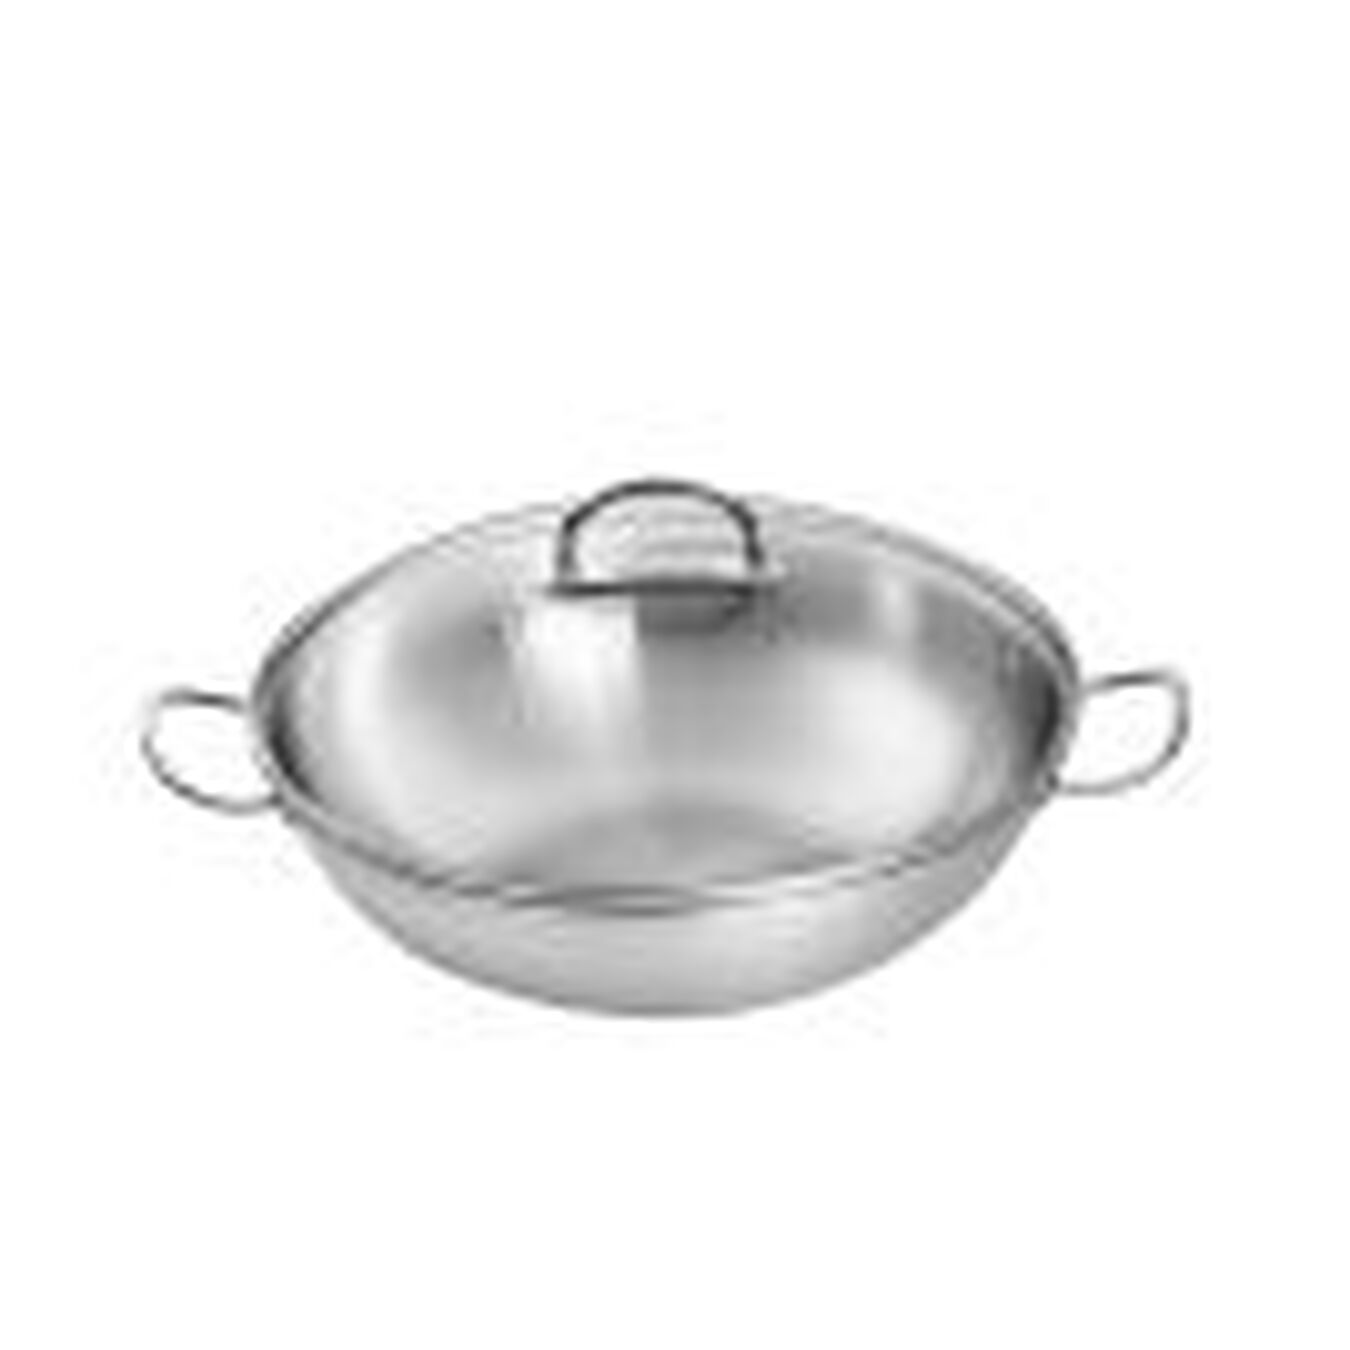 36 cm / 14 inch 18/10 Stainless Steel Wok,,large 5